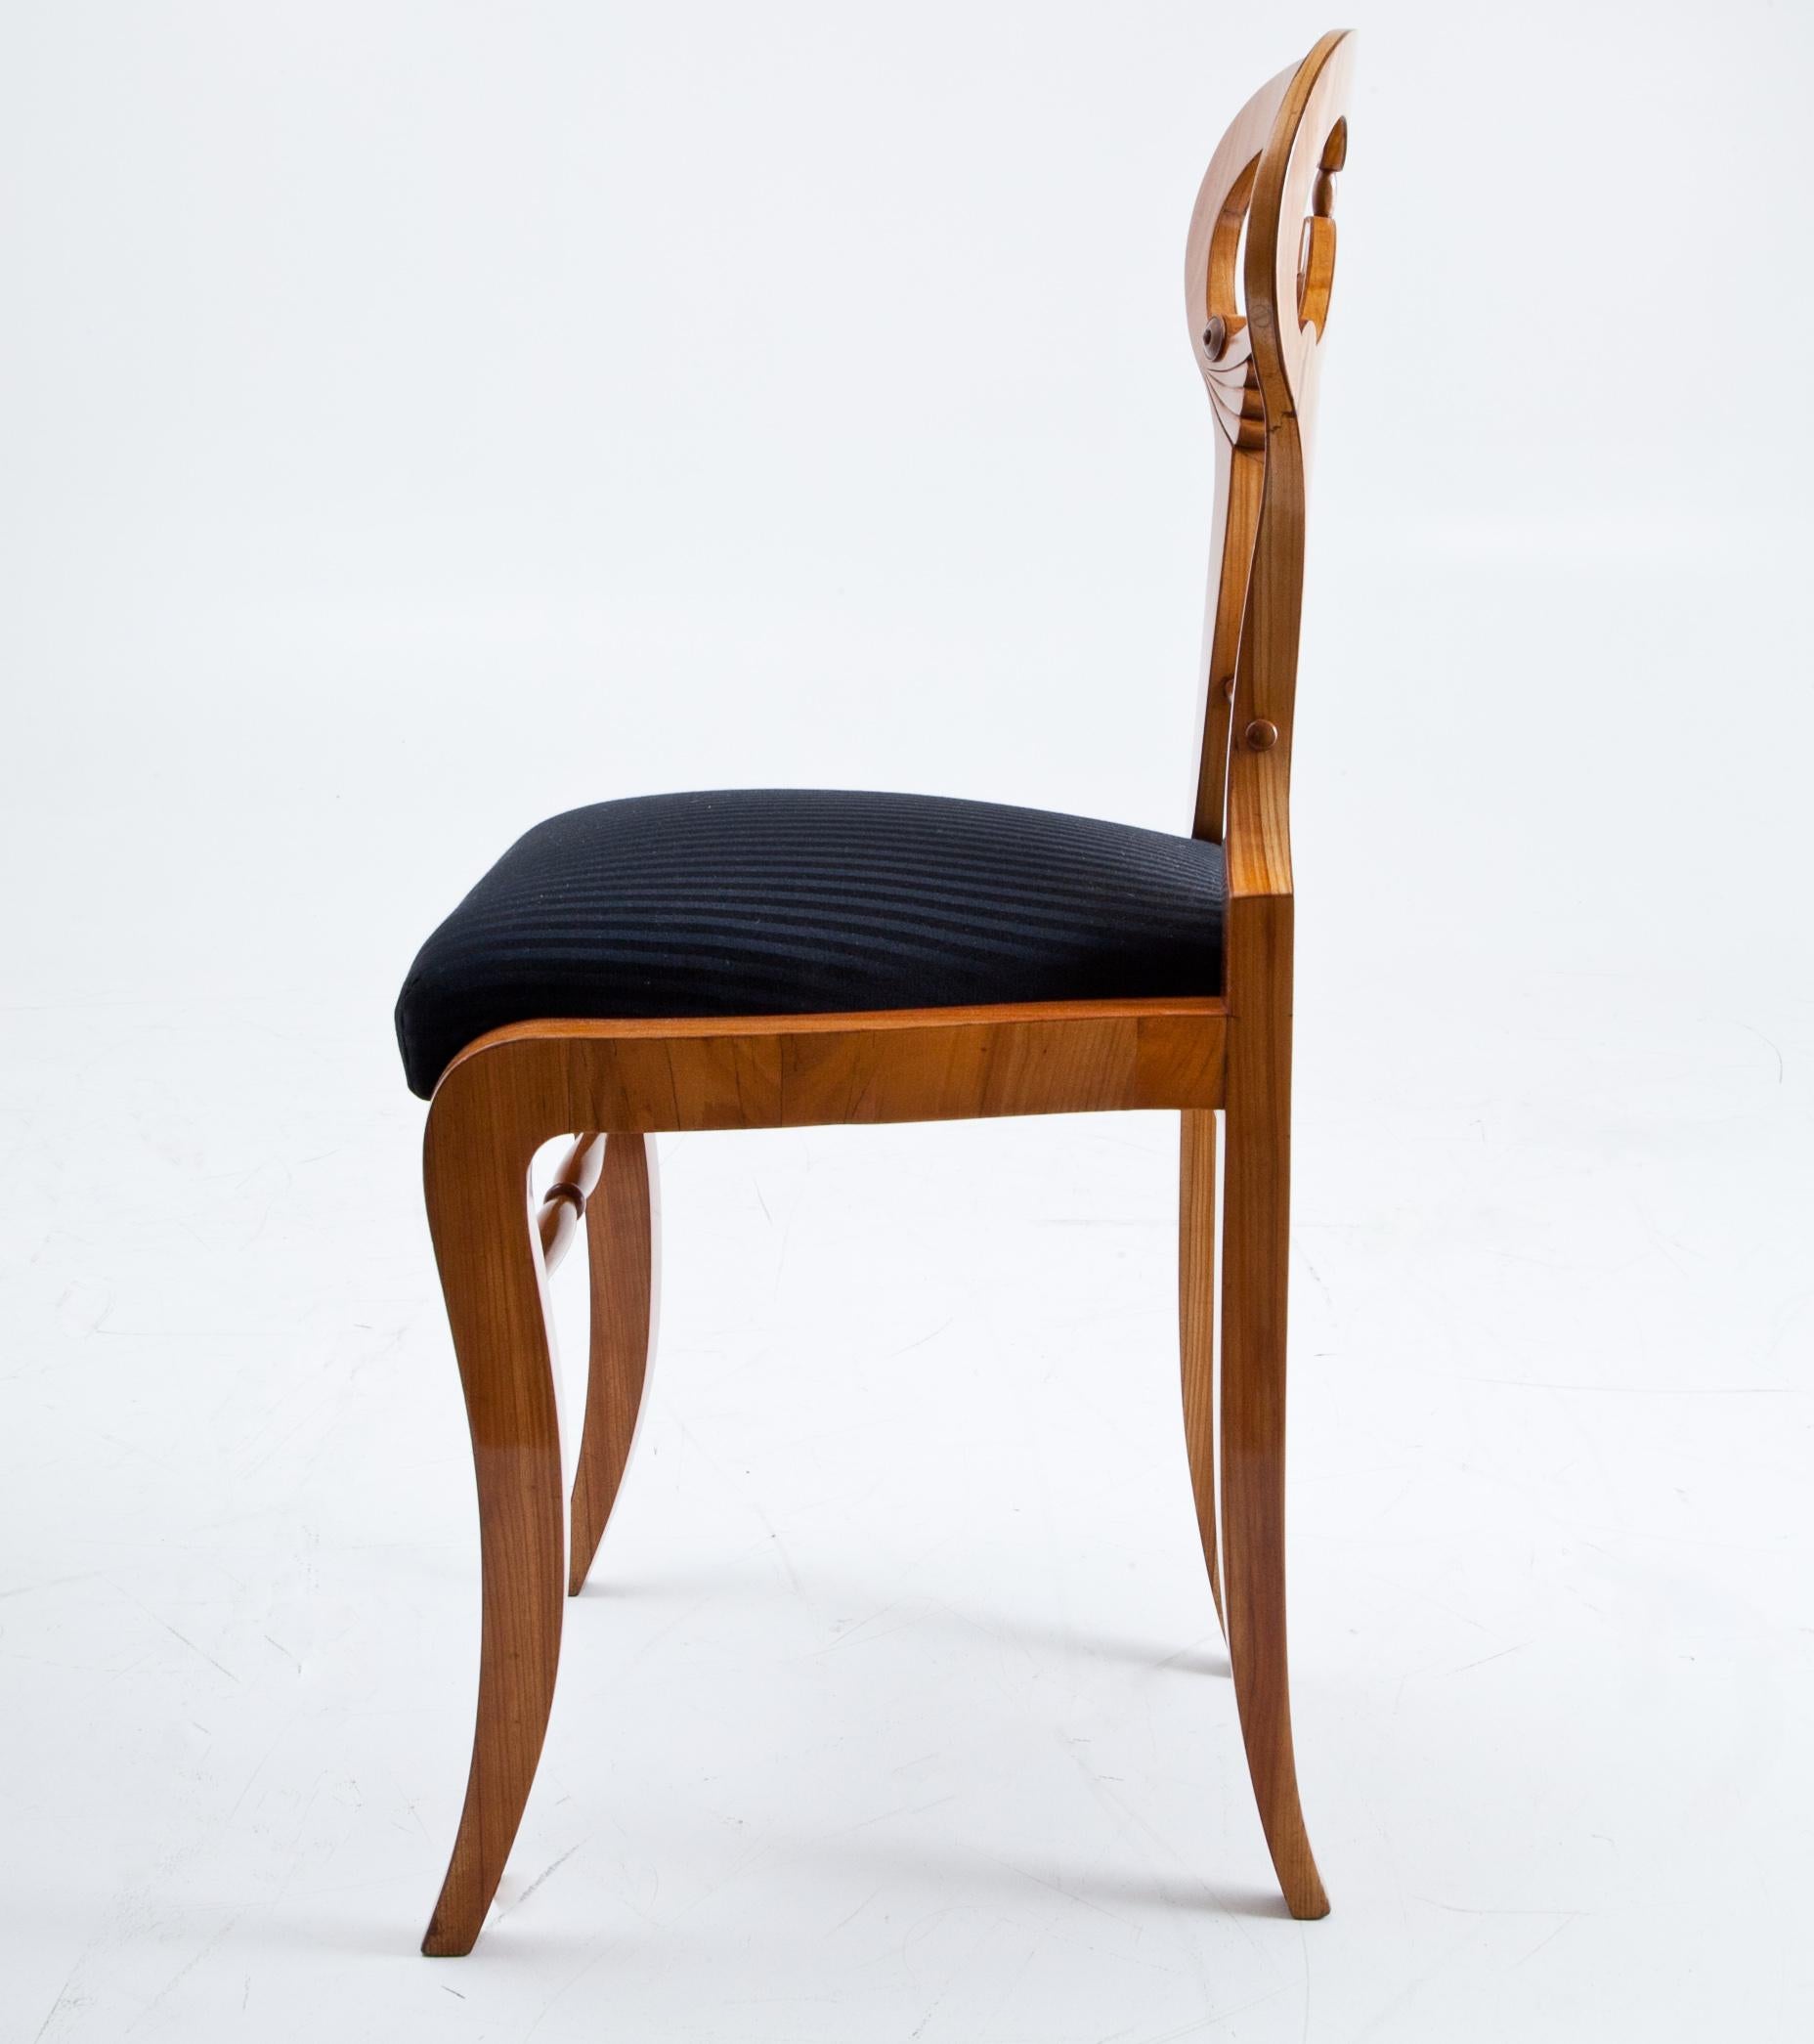 Biedermeier cherrywood chair with a turned stretcher between the slightly bent front legs. The shovel-shaped backrests shows turned stretchers as well as fan-carvings in the corners beneath the curved middle slat. The cushioned seat was